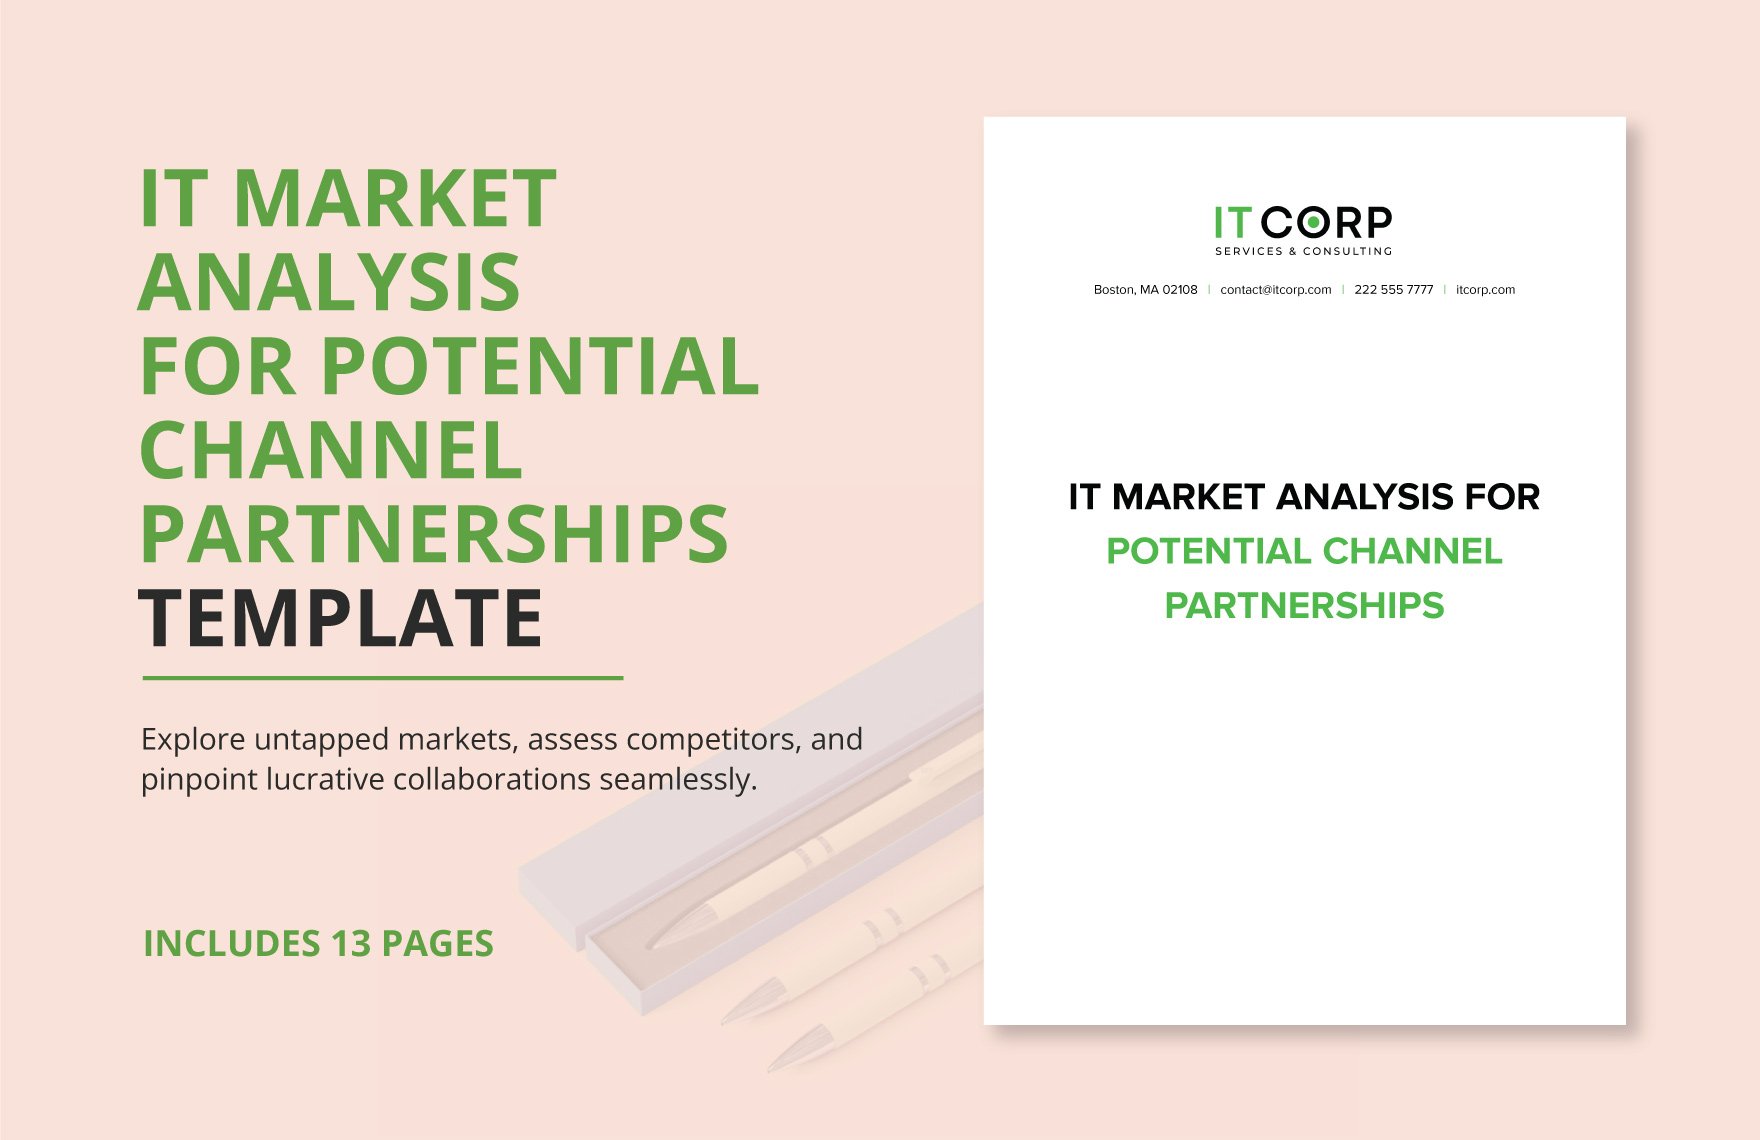 IT Market Analysis for Potential Channel Partnerships Template